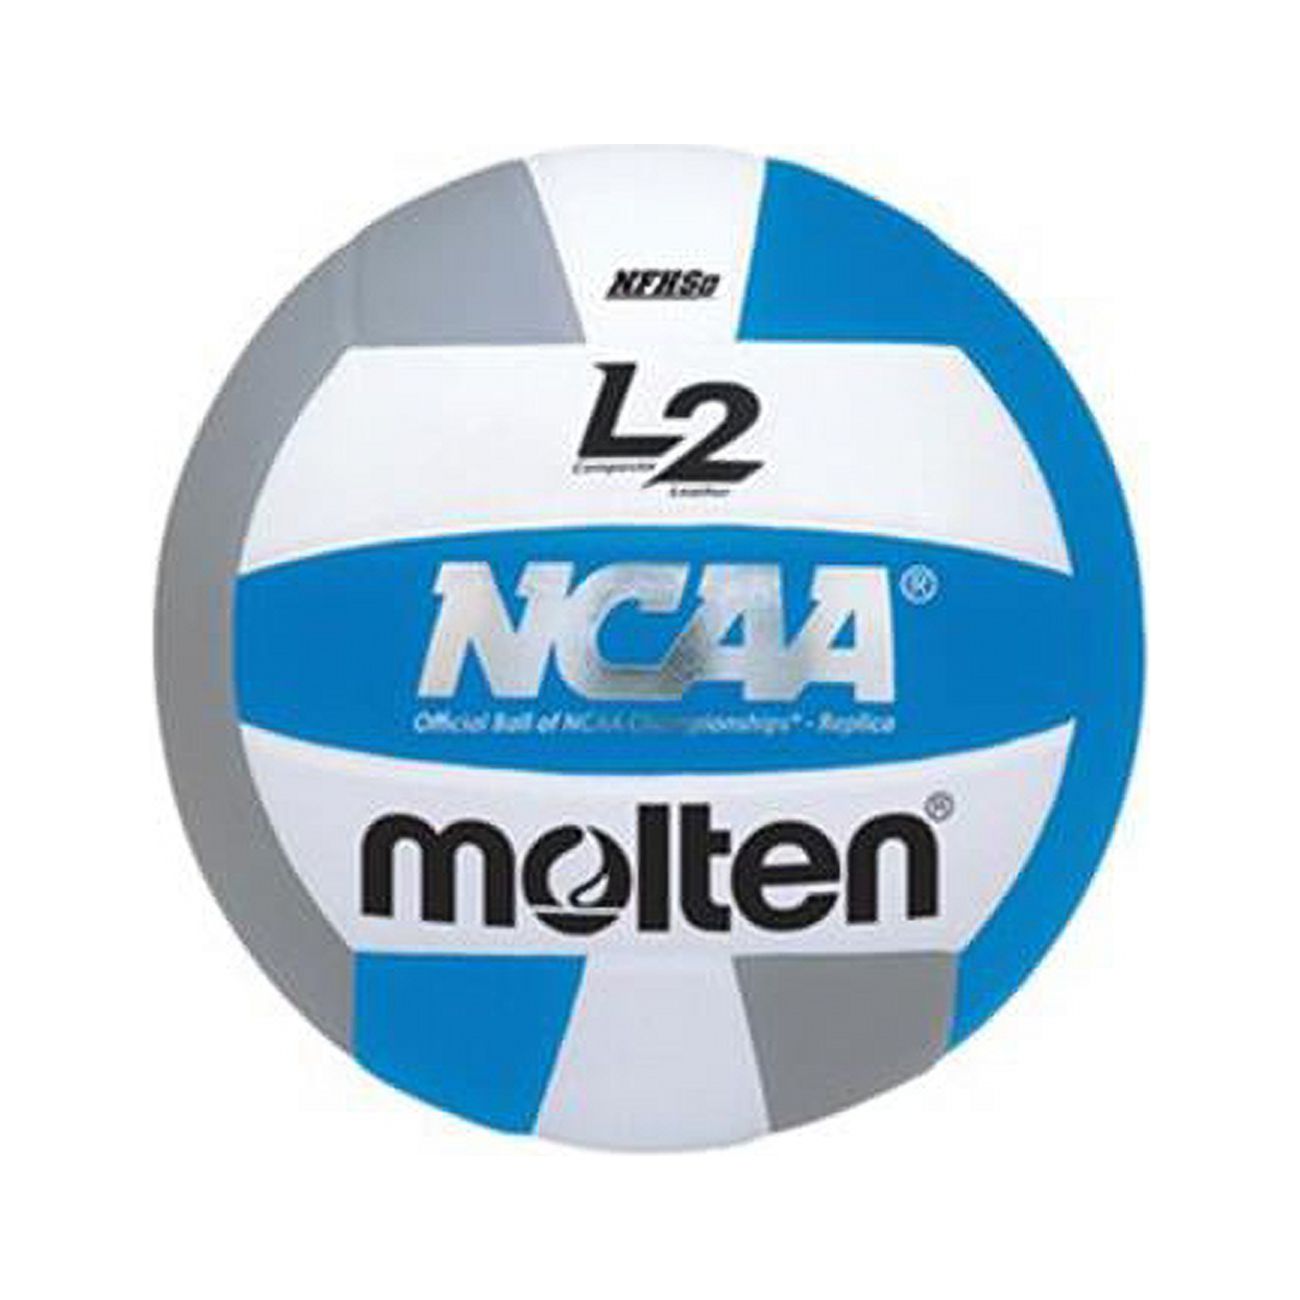 Molten L2 Series NFHS Approved Volleyball - image 1 of 2